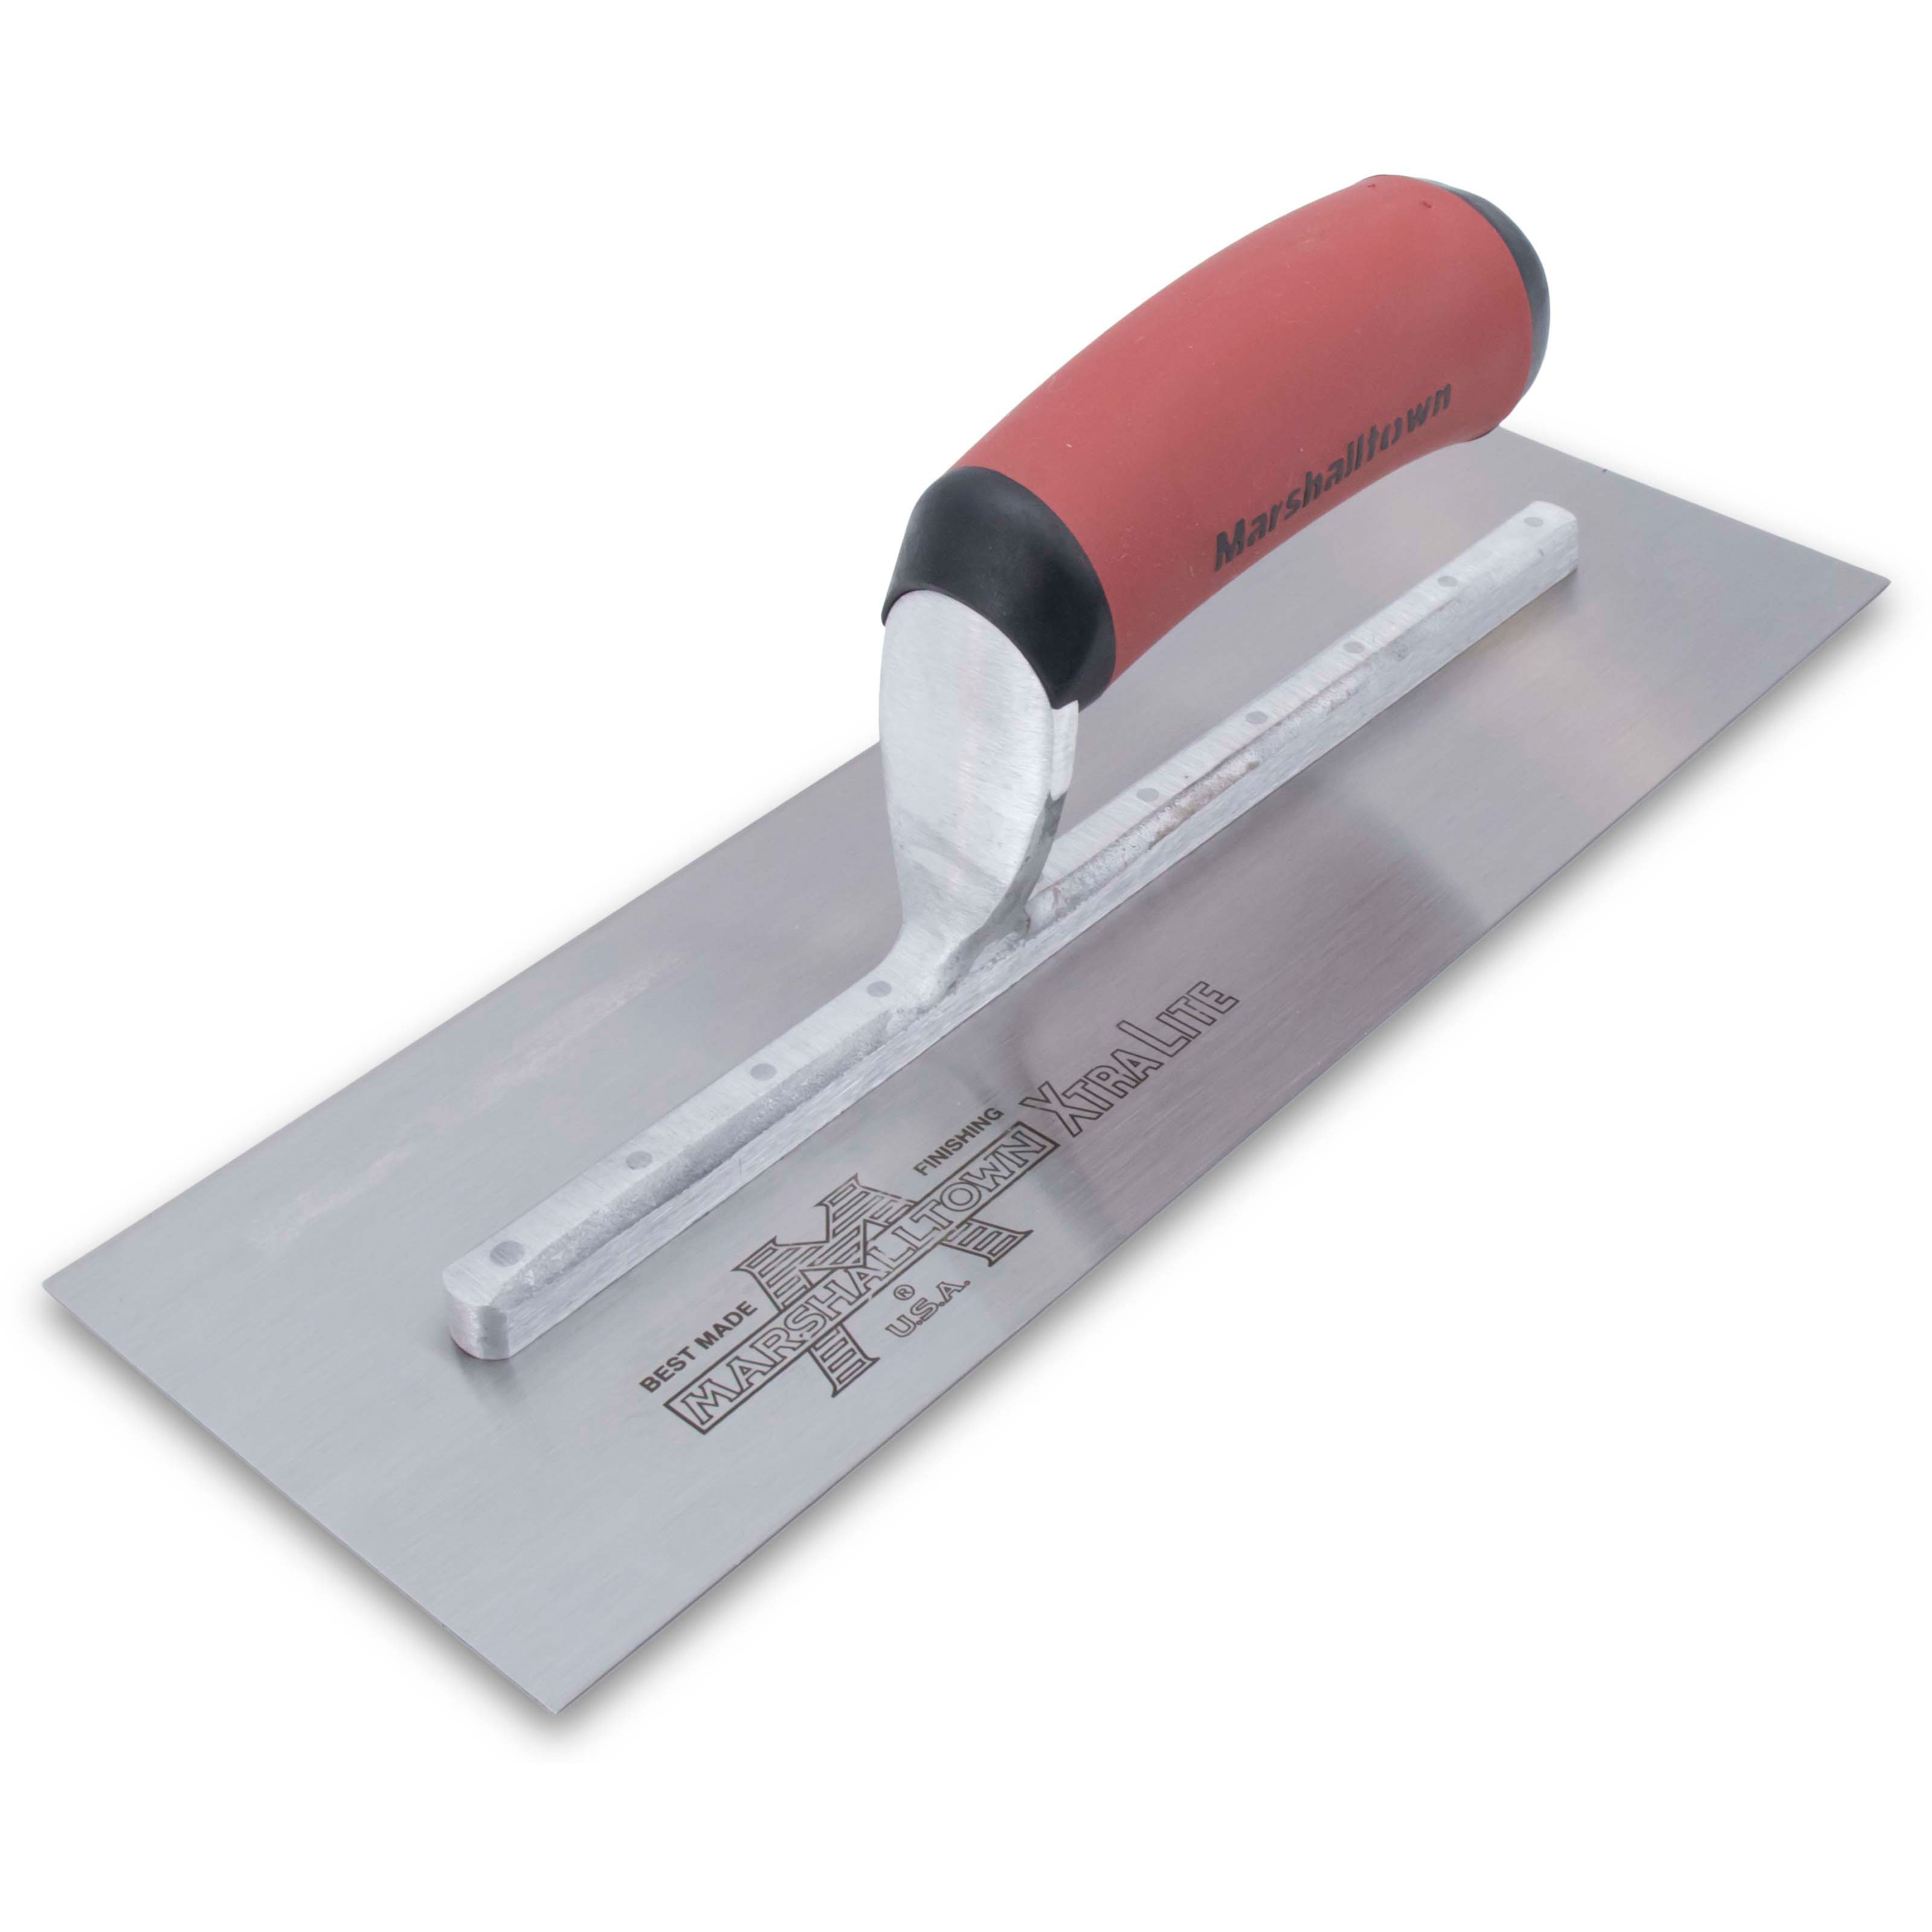 Marshalltown MXS62D 12in. x 4in. Finishing Trowel Curved DuraSoft Handle MAT-MXS62D